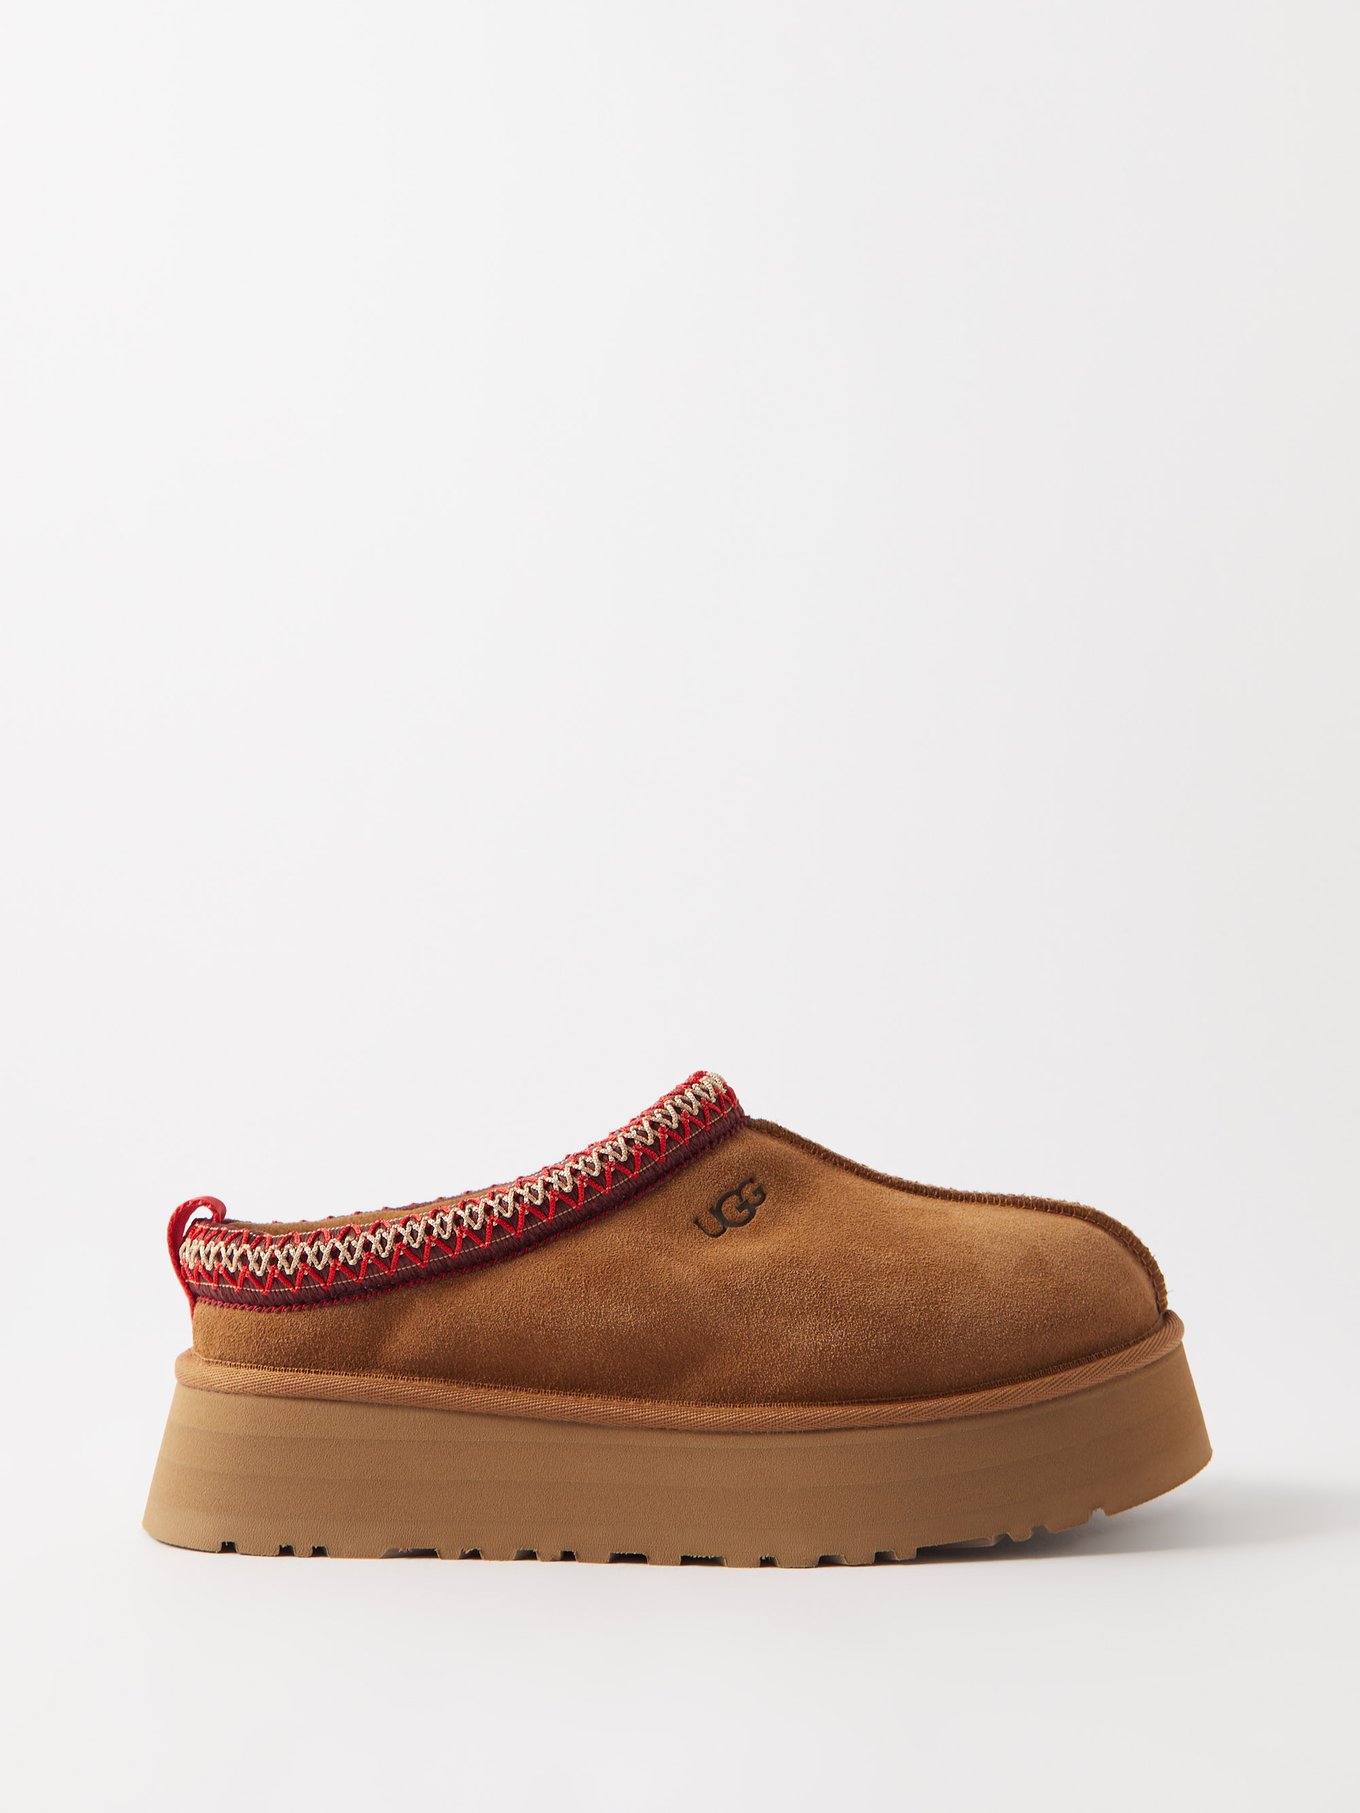 Brown Tazz Shearling-lined Suede Platform Slippers Ugg